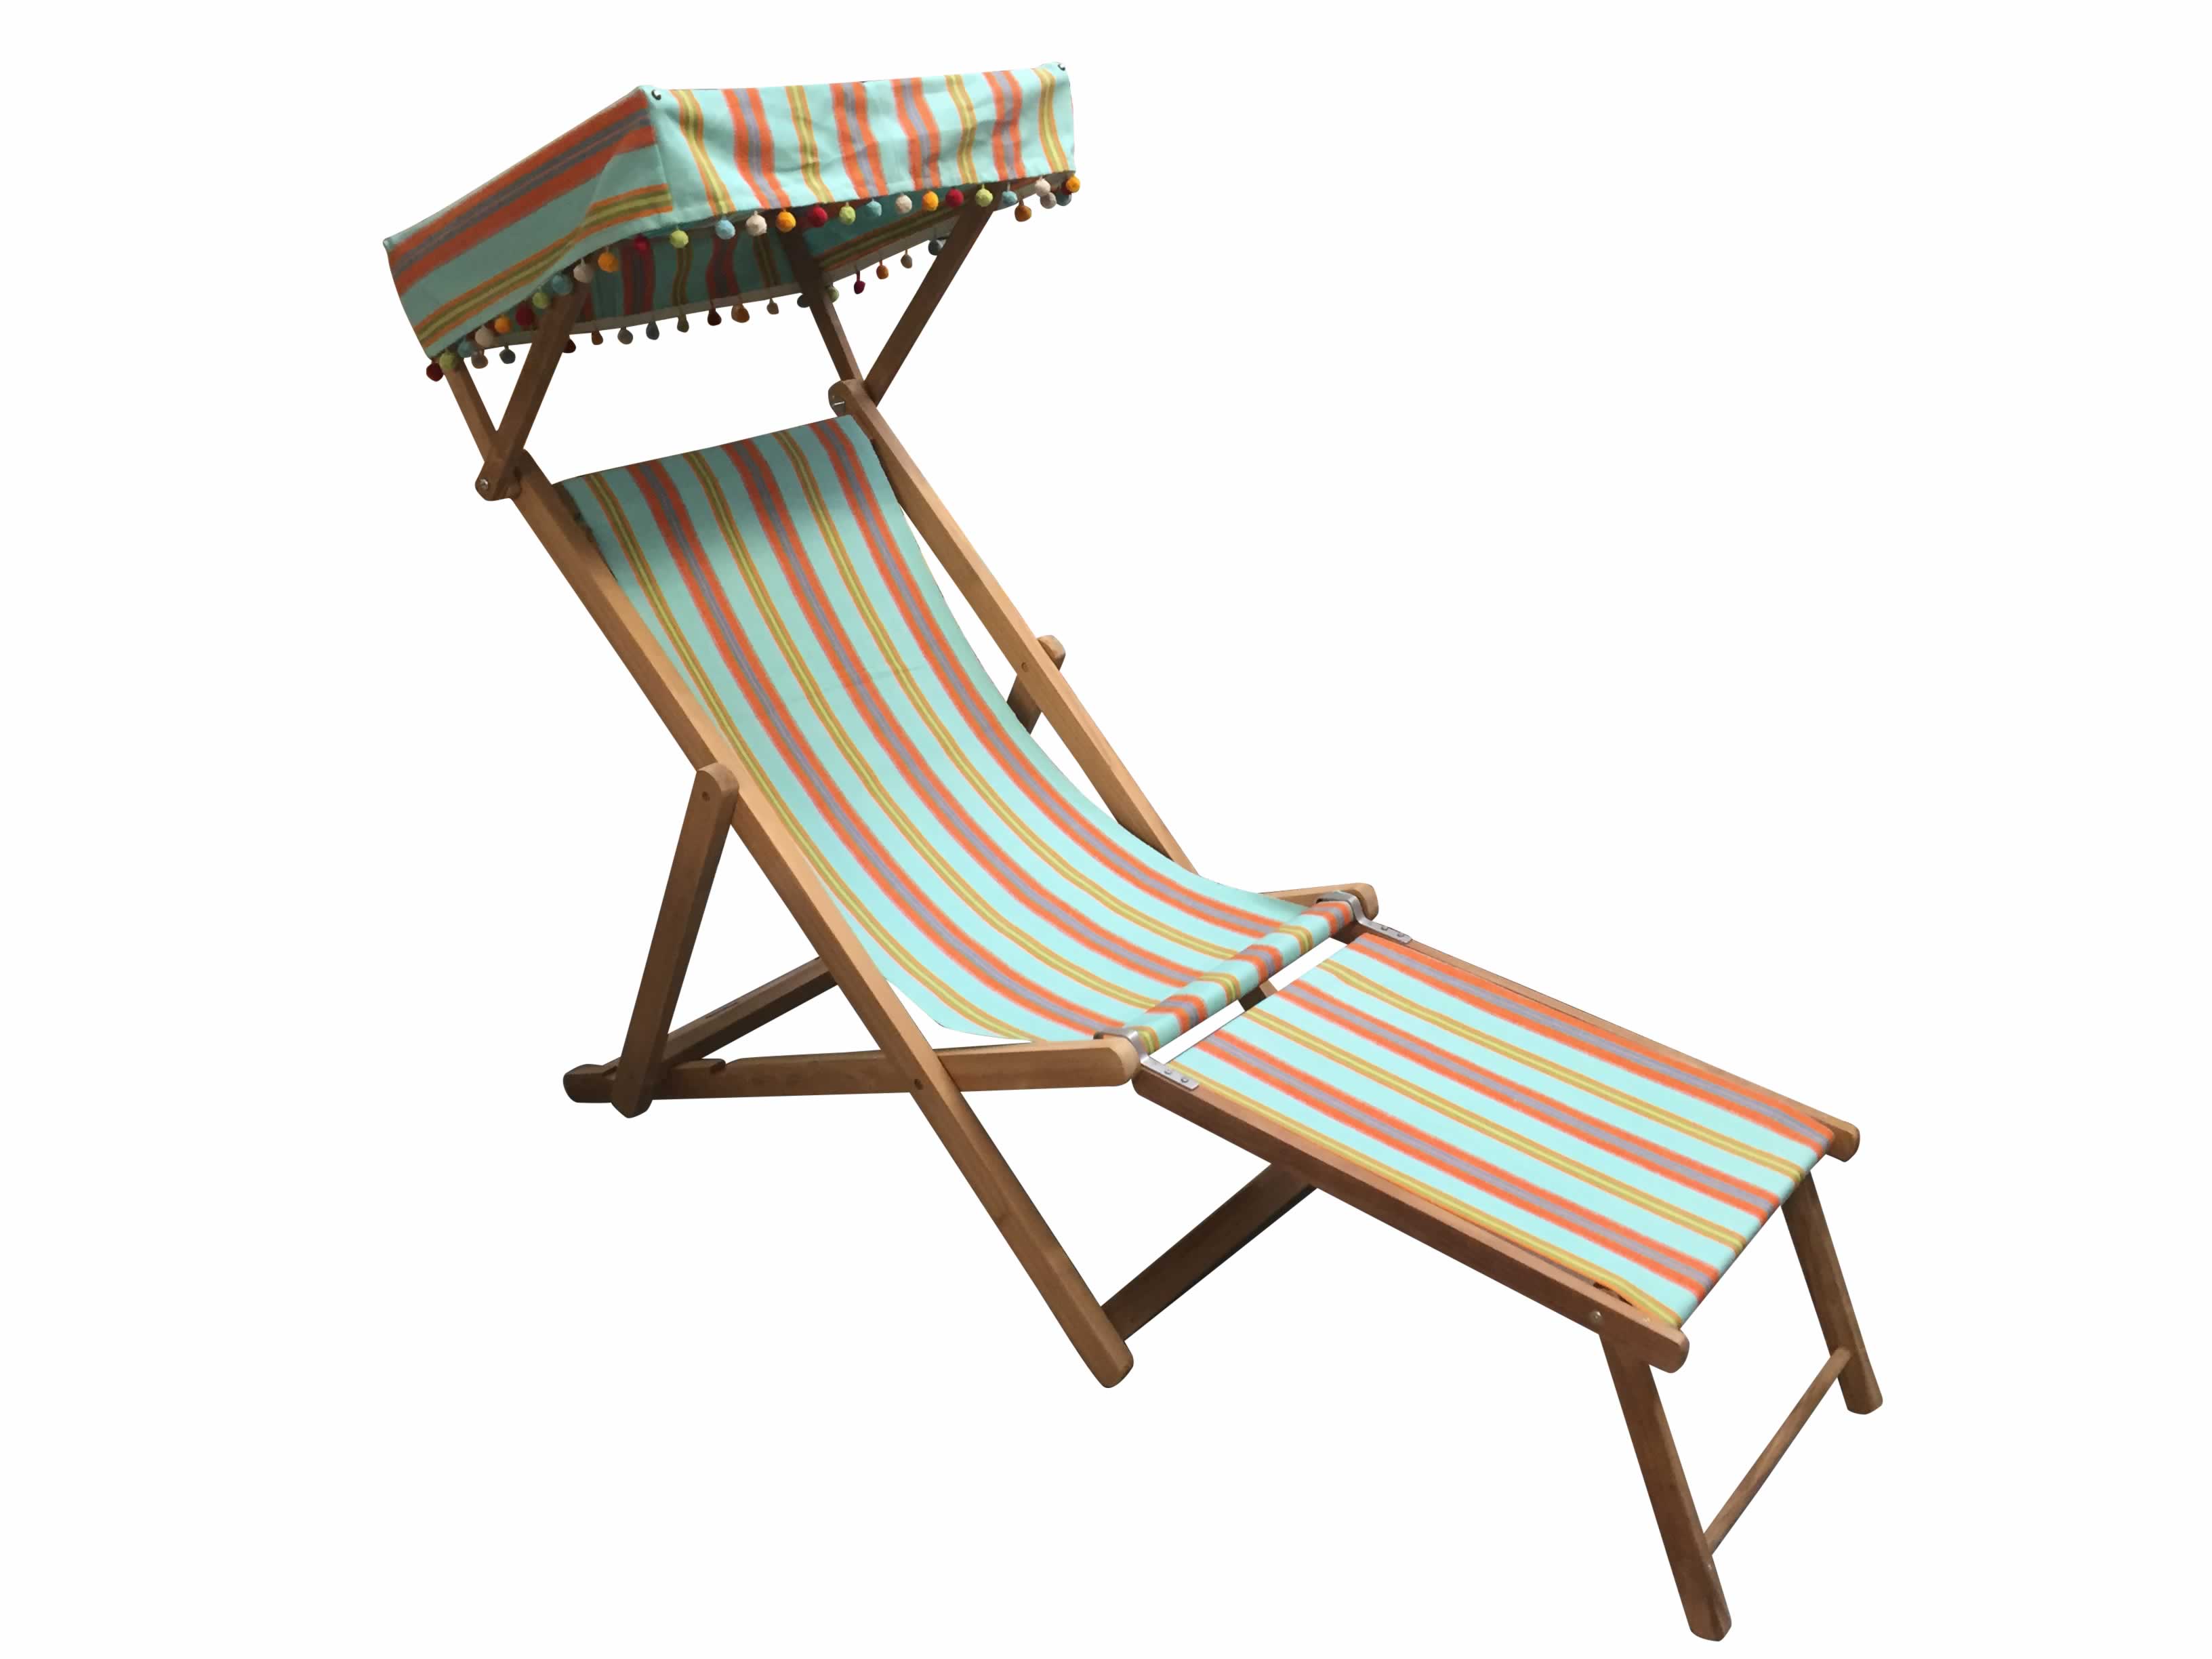 Petanque Turquoise Edwardian Deckchairs with Canopy and Footstool